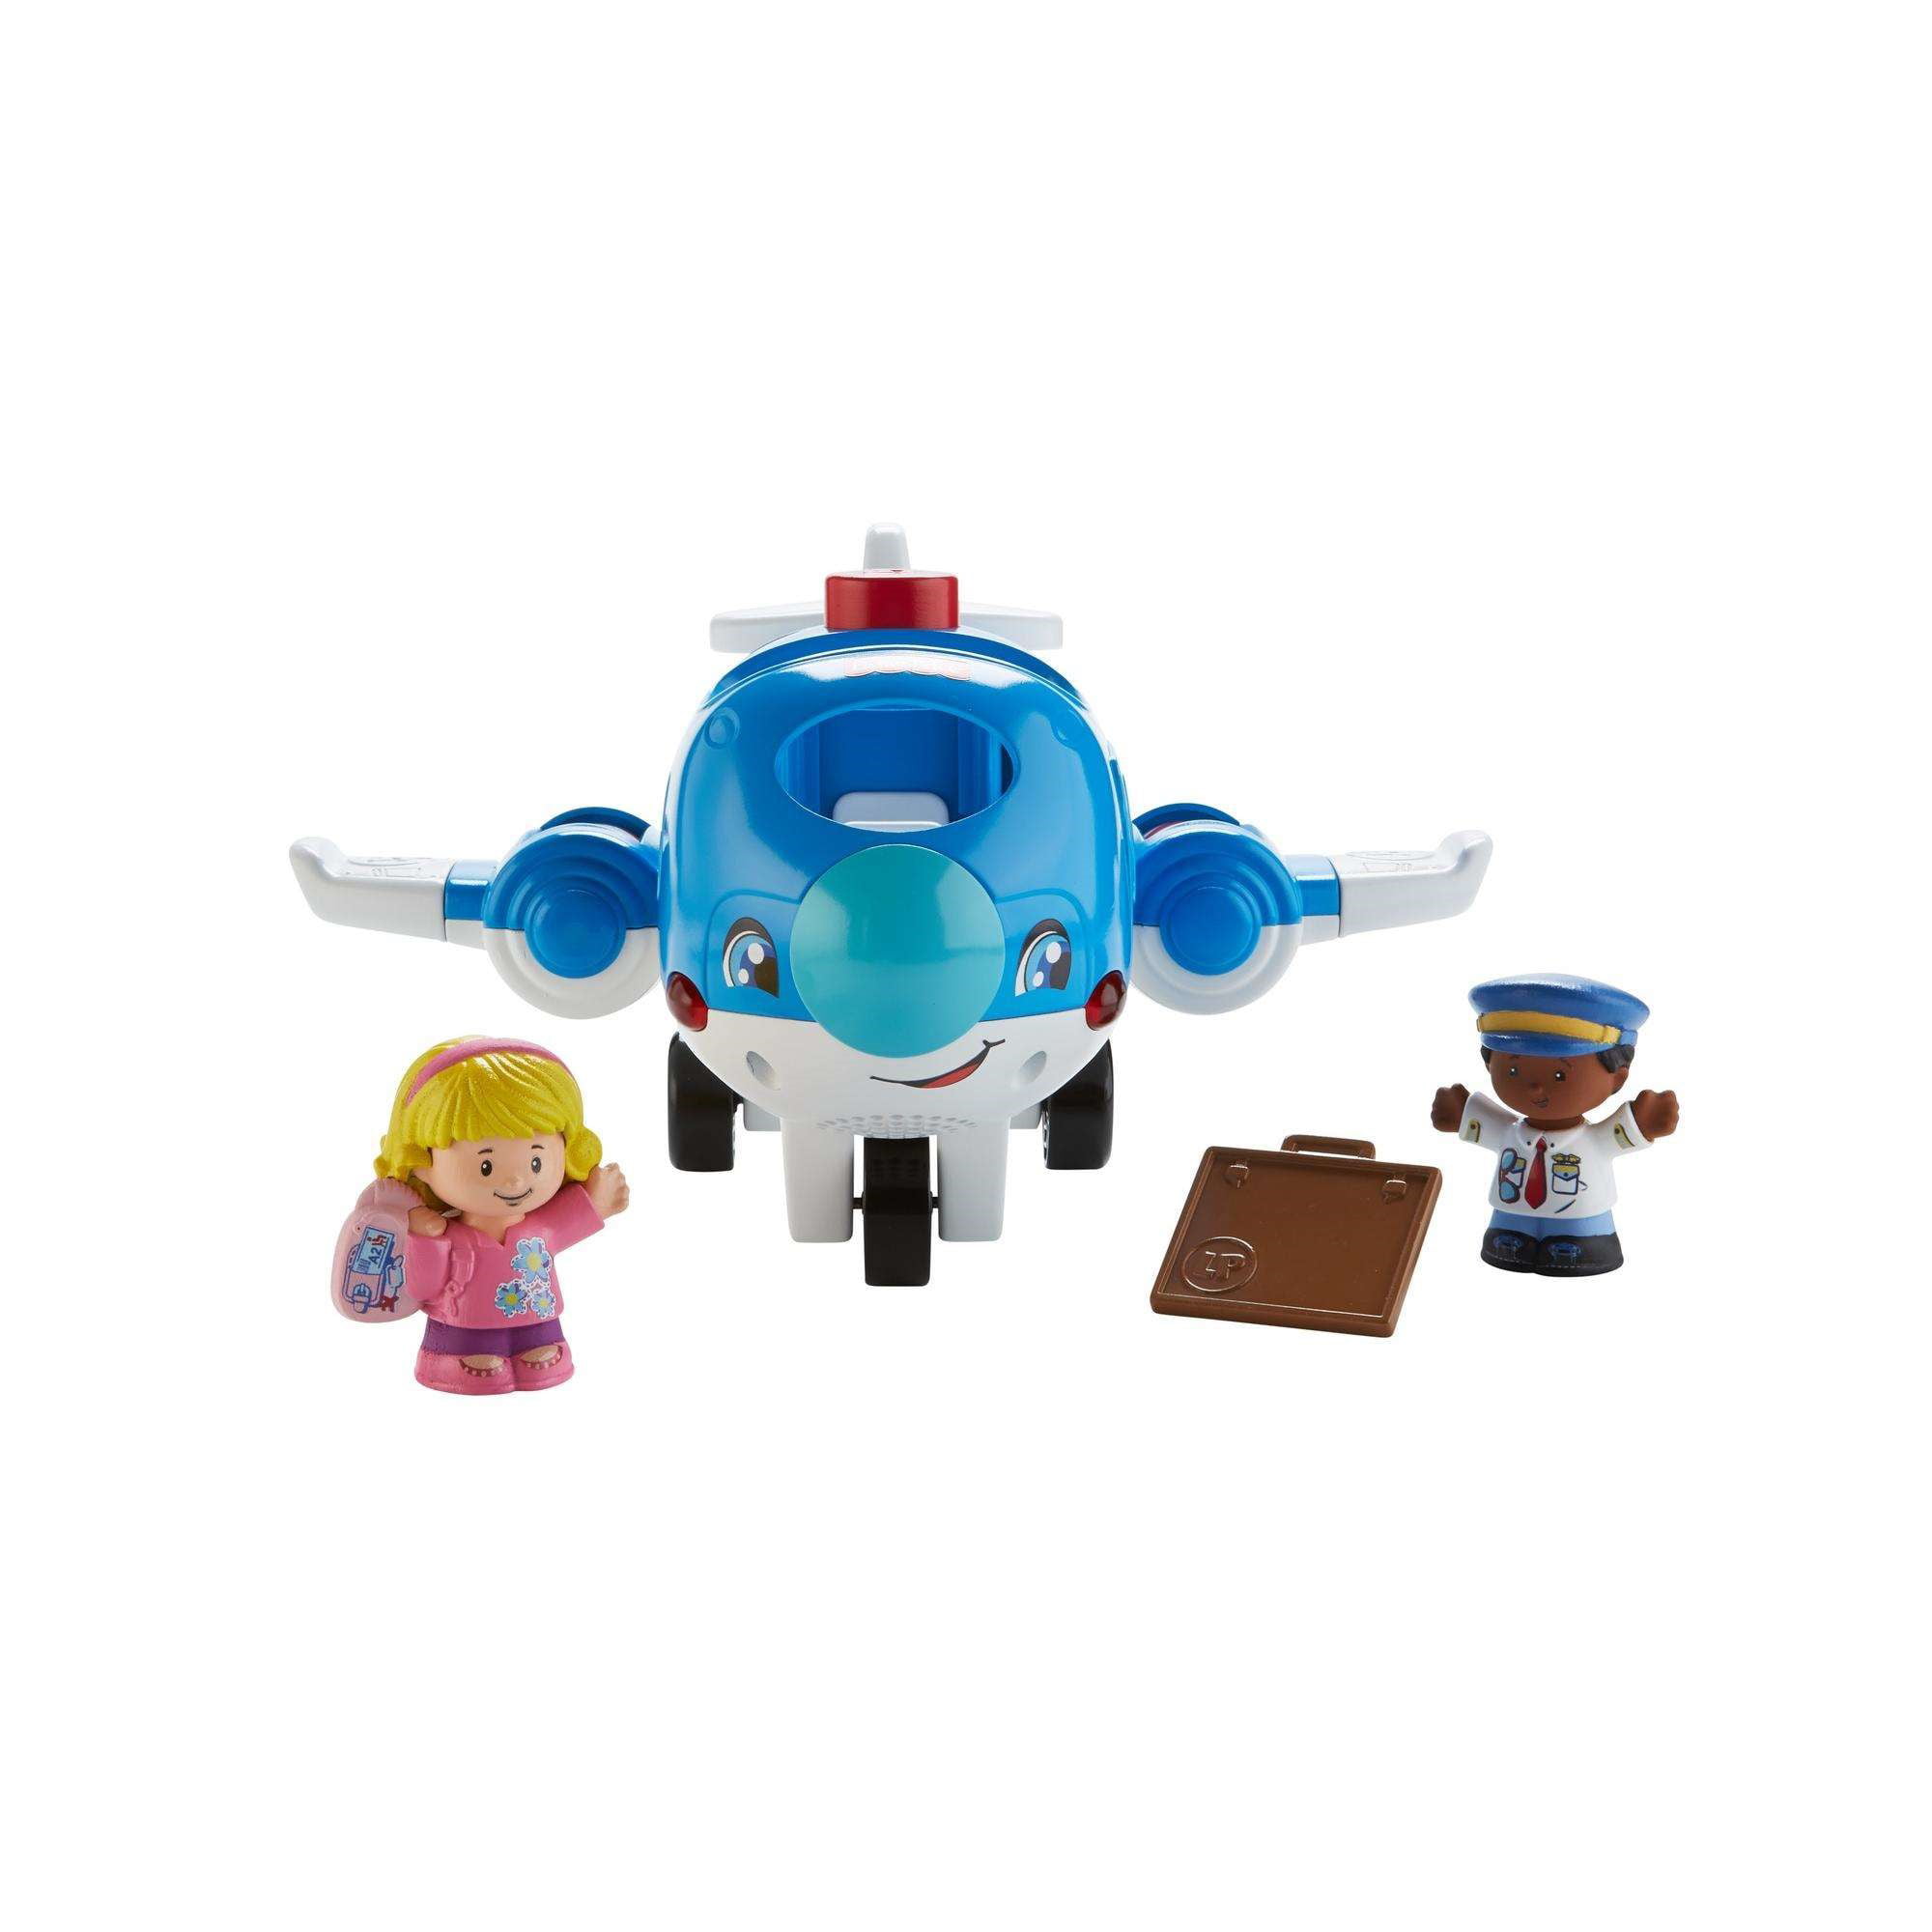 Little People Travel Together Airplane Toy for Kids Children for sale online 